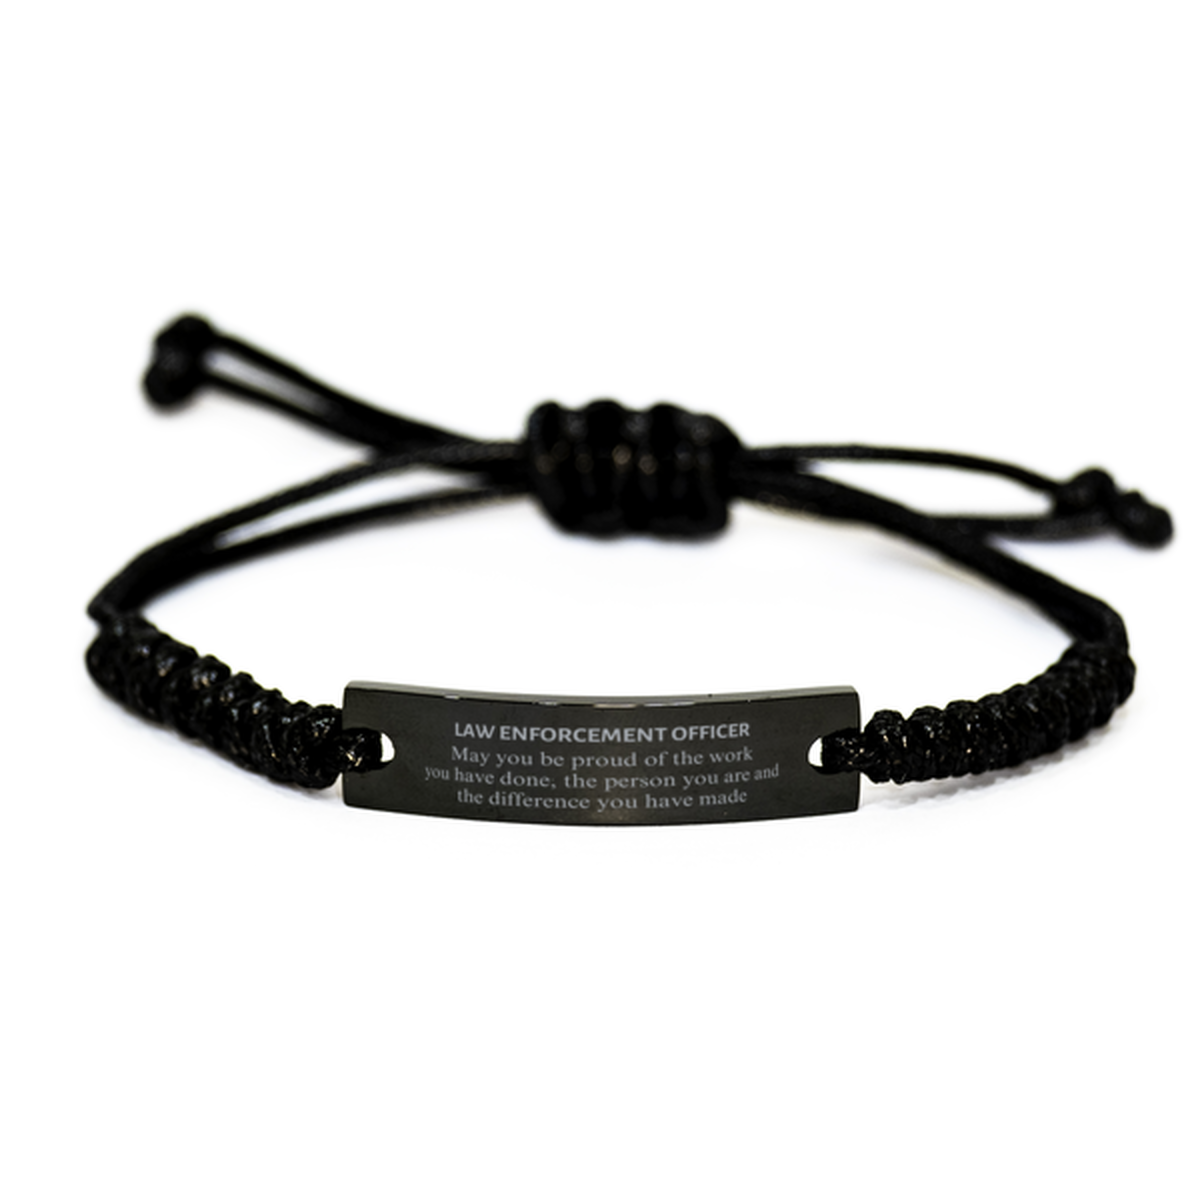 Law Enforcement Officer May you be proud of the work you have done, Retirement Law Enforcement Officer Black Rope Bracelet for Colleague Appreciation Gifts Amazing for Law Enforcement Officer